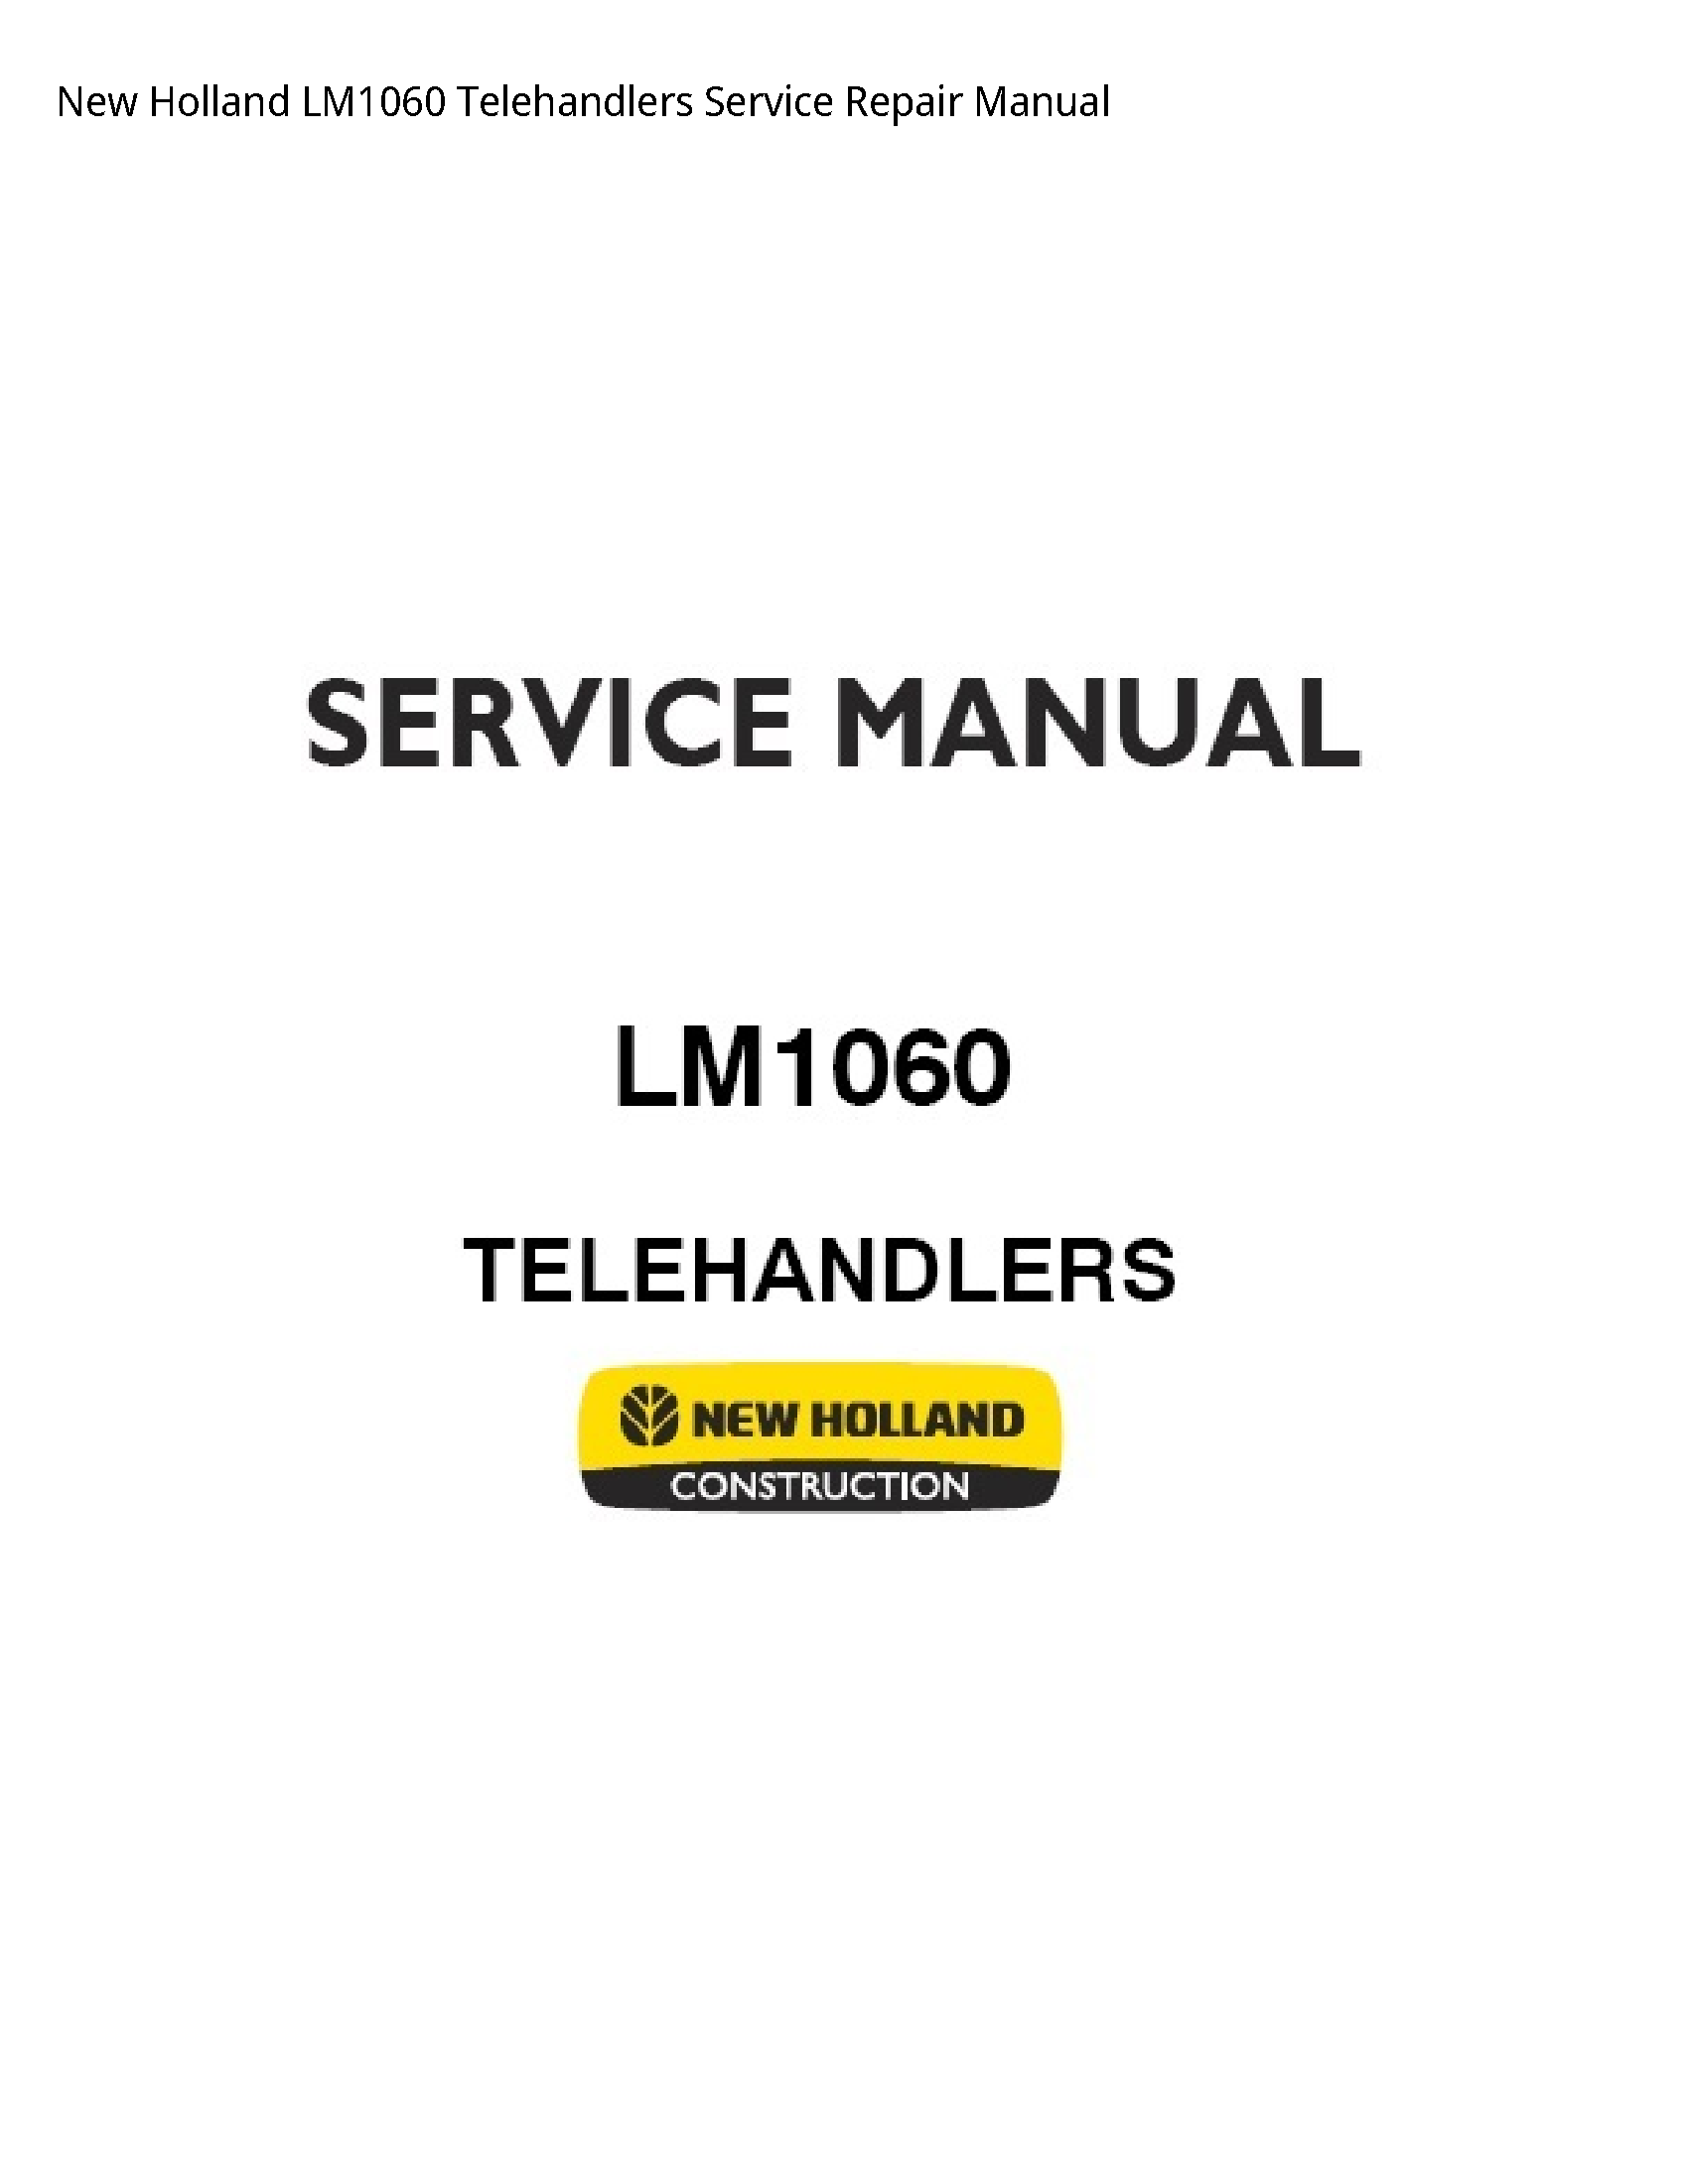 New Holland LM1060 Telehandlers manual